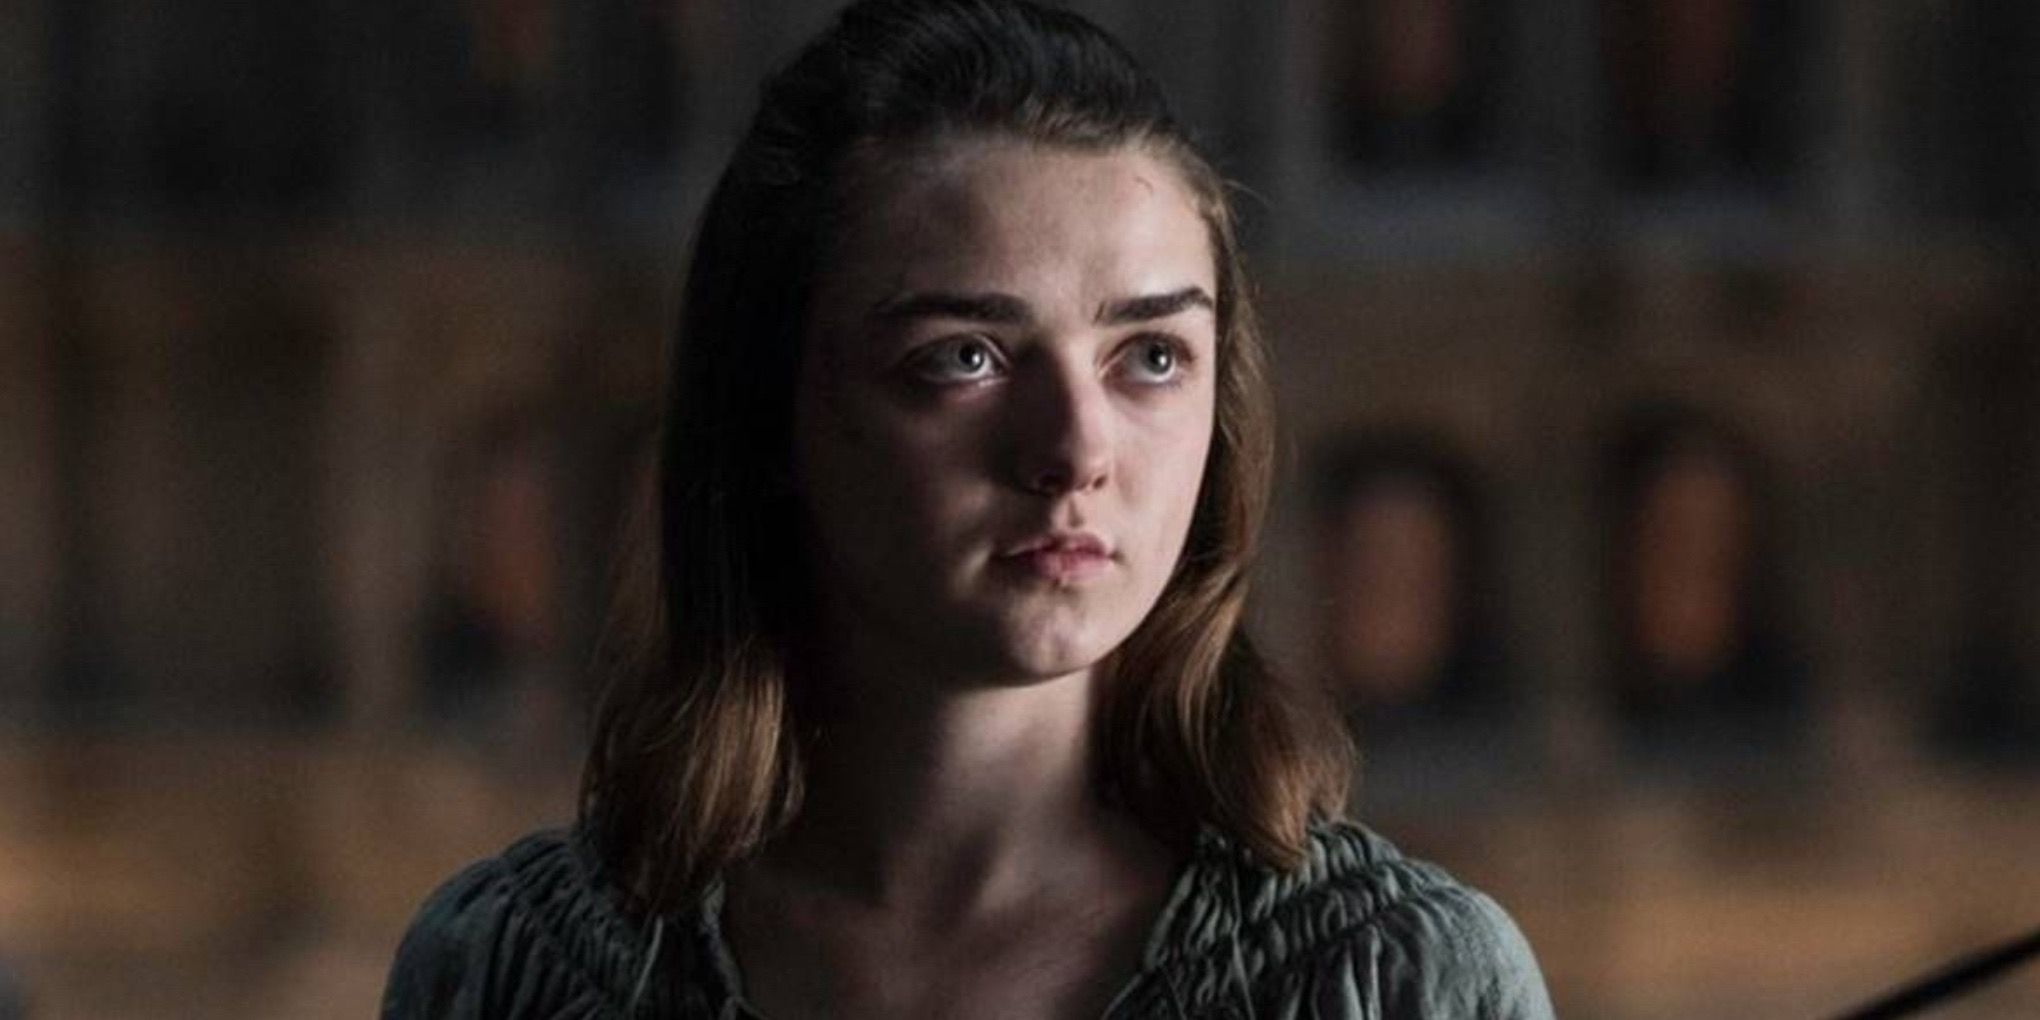 Arya Stark looking serious while pointing her sword at someone off-screen in Game of Thrones